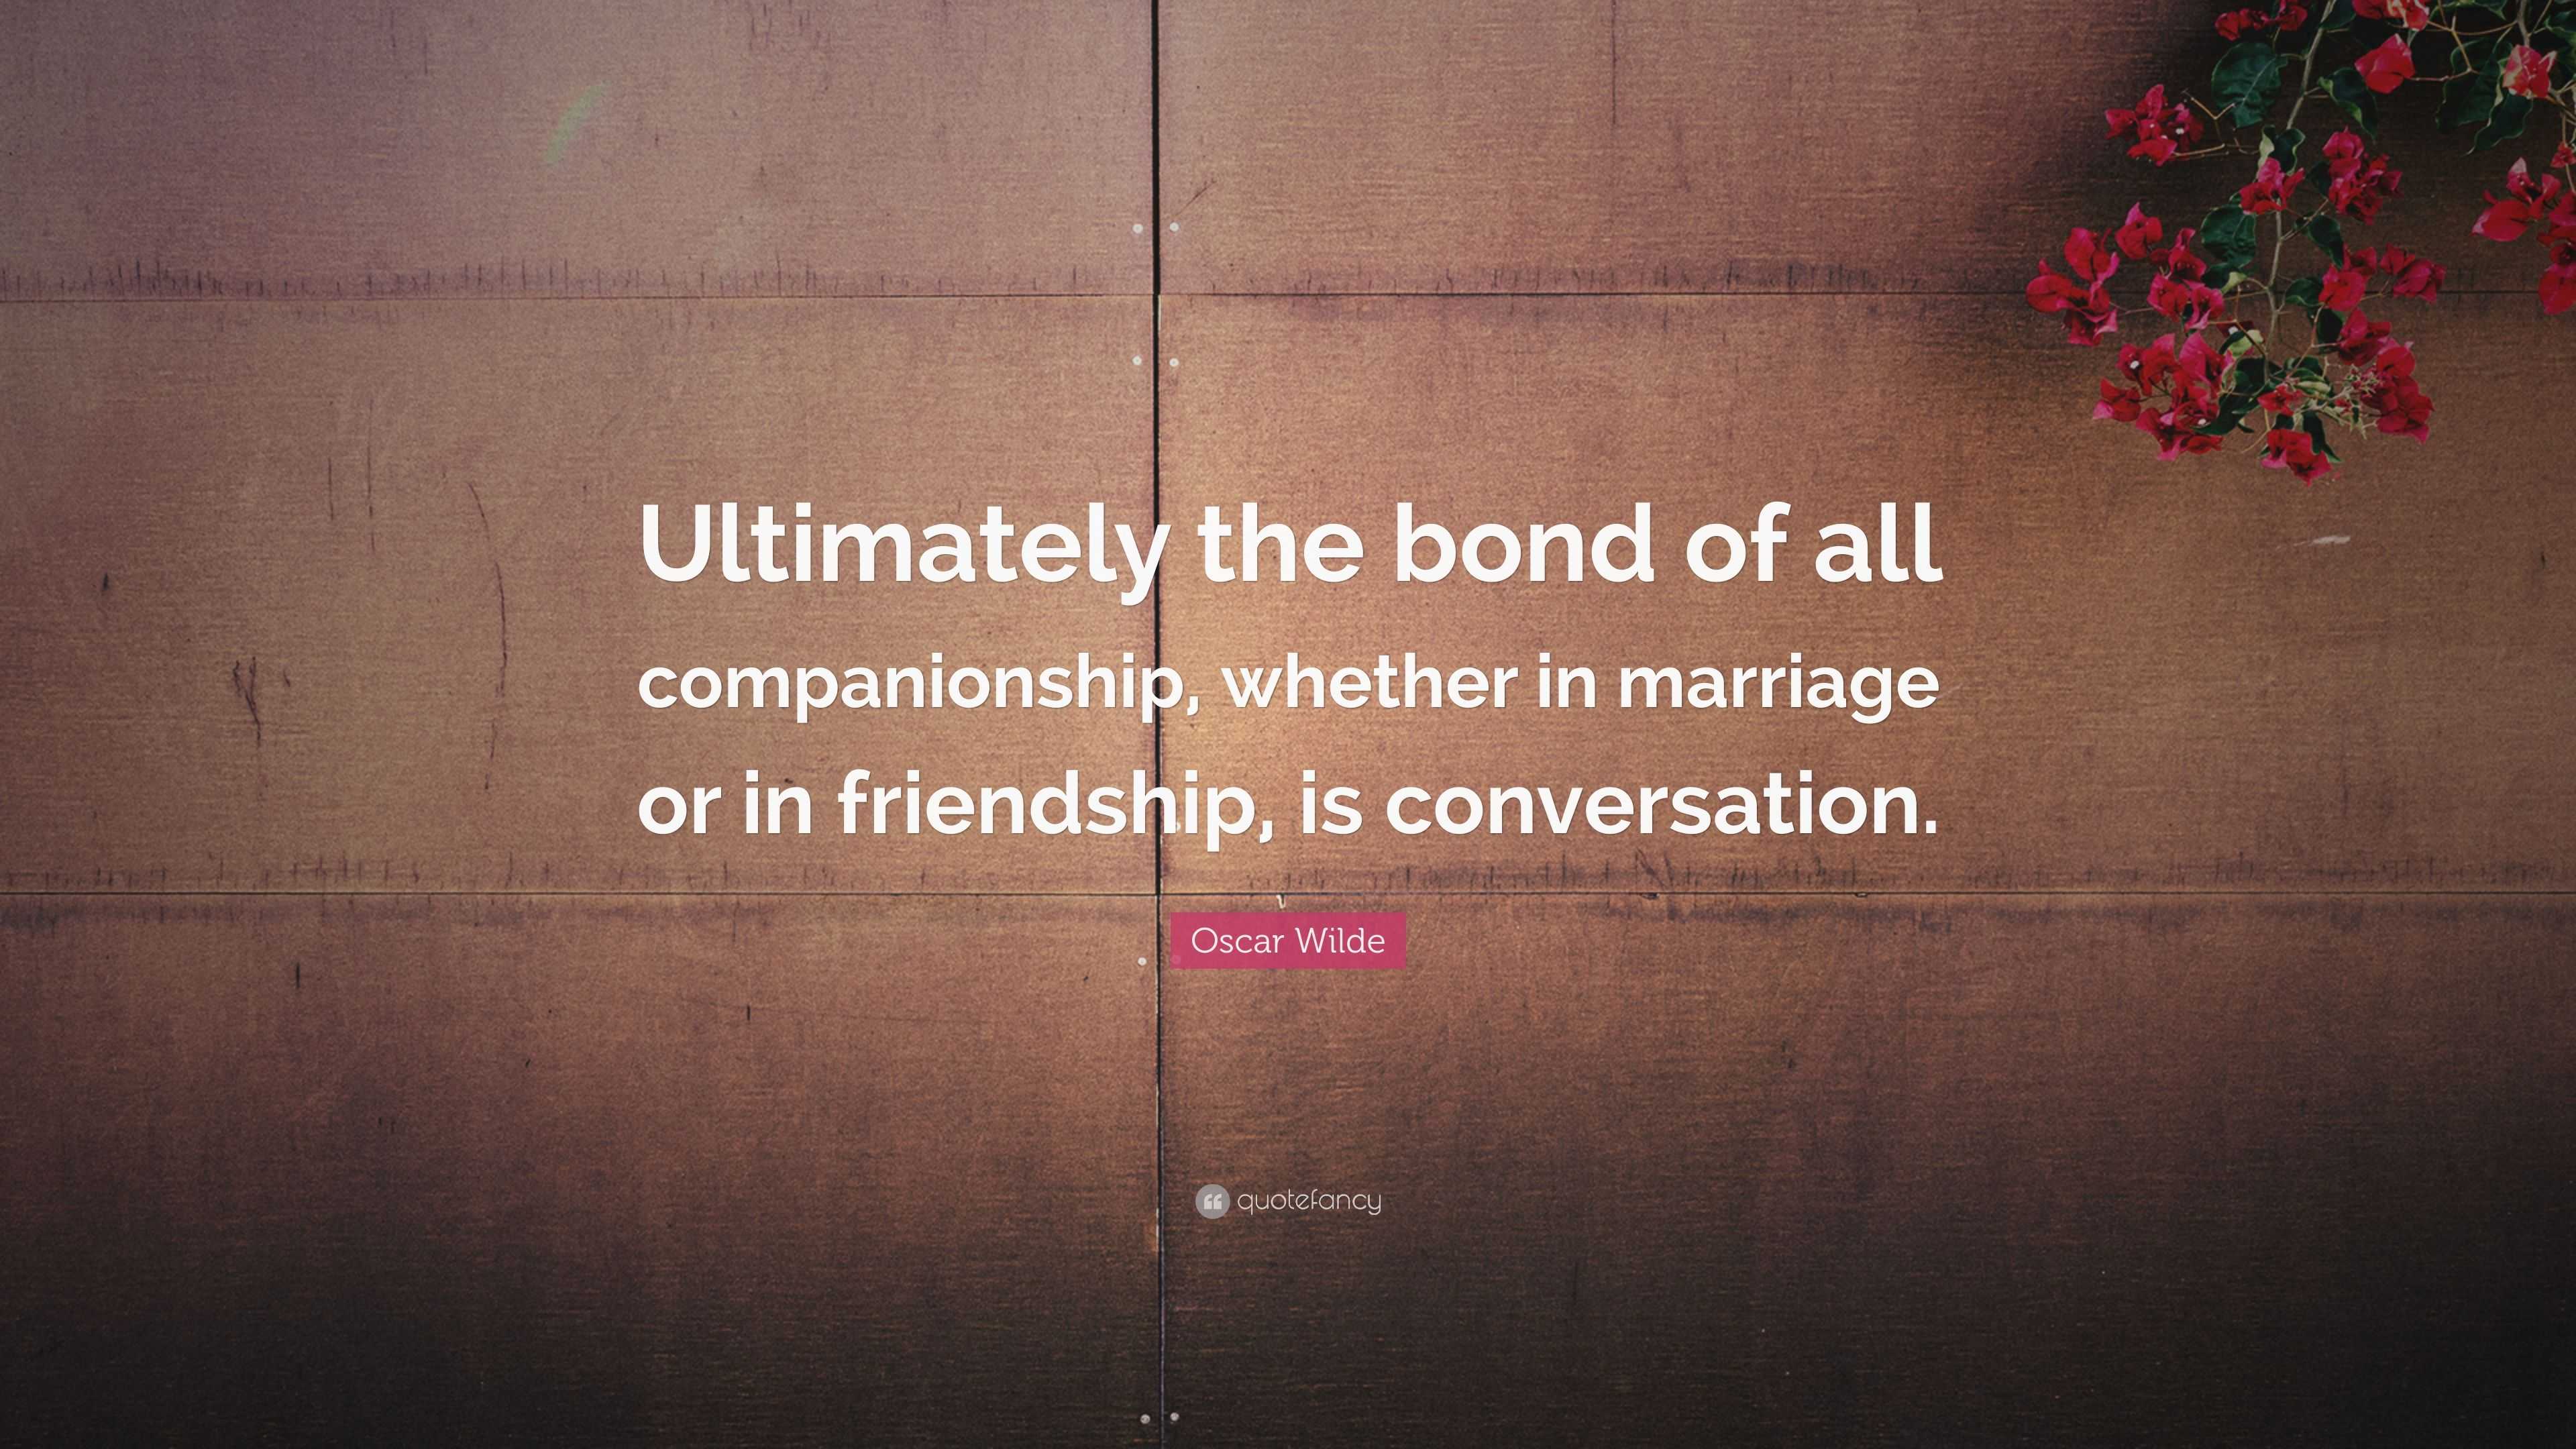 Oscar Wilde Quote: “Ultimately the bond of all companionship, whether